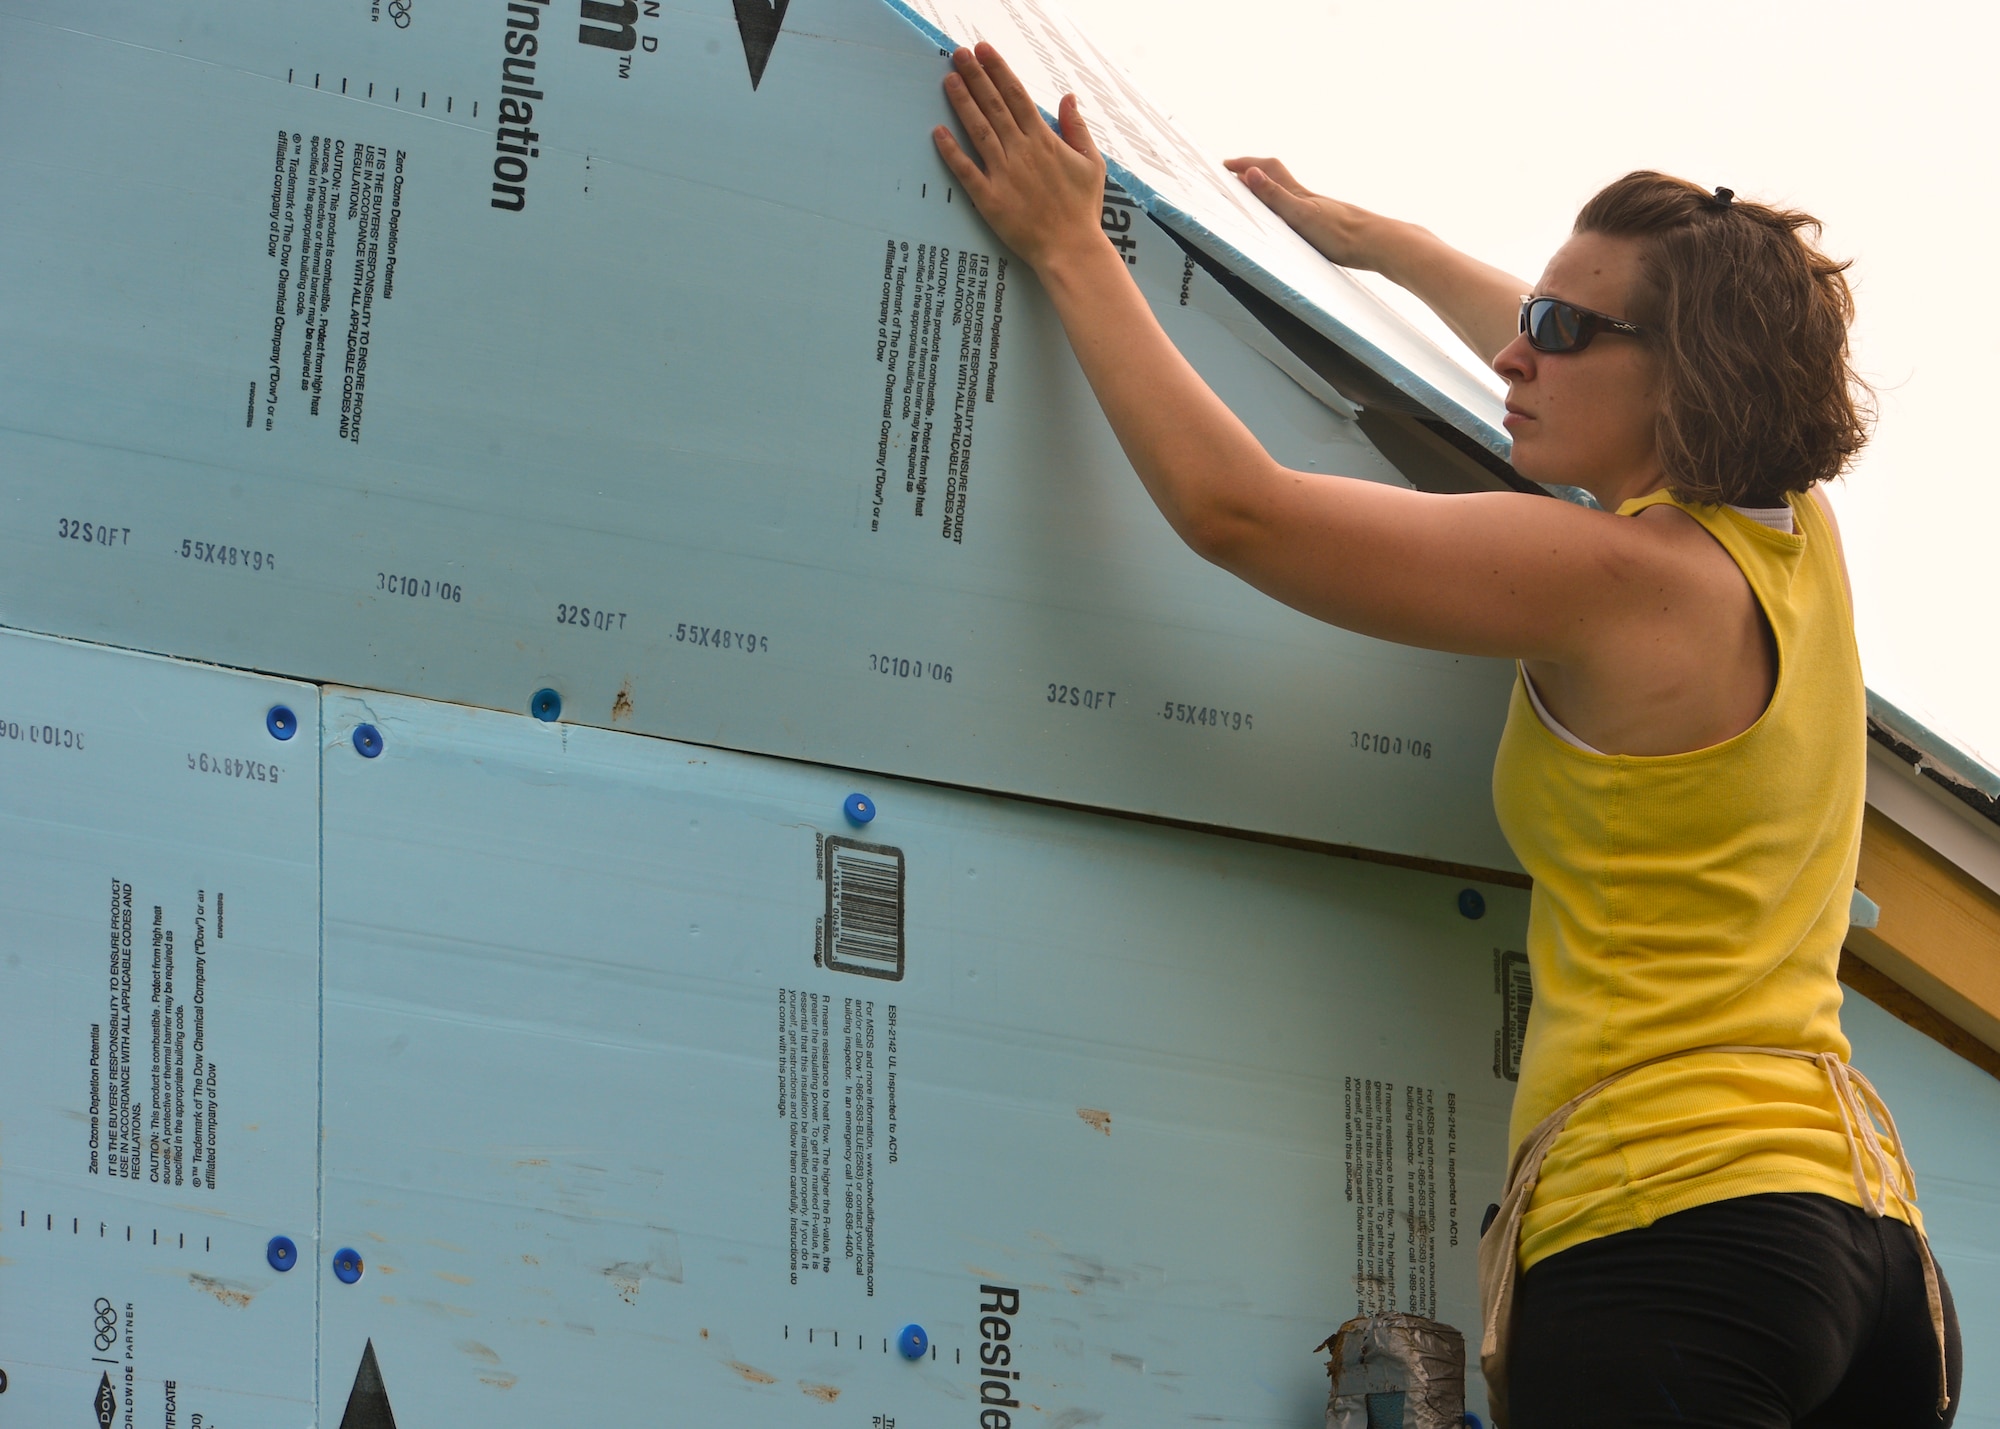 Jessica Stout, wife of Master Sgt. Jeffrey Stout, 436th Maintenance Squadron isochronal maintenance dock chief, stands on a ladder as she cuts residential sheathing insulation with an utility knife July 12, 2014, at a Habitat for Humanity construction site in Frederica, Del. Several family members of Airmen also volunteered at the event. (U.S. Air Force photo/Airman 1st Class Zachary Cacicia)	